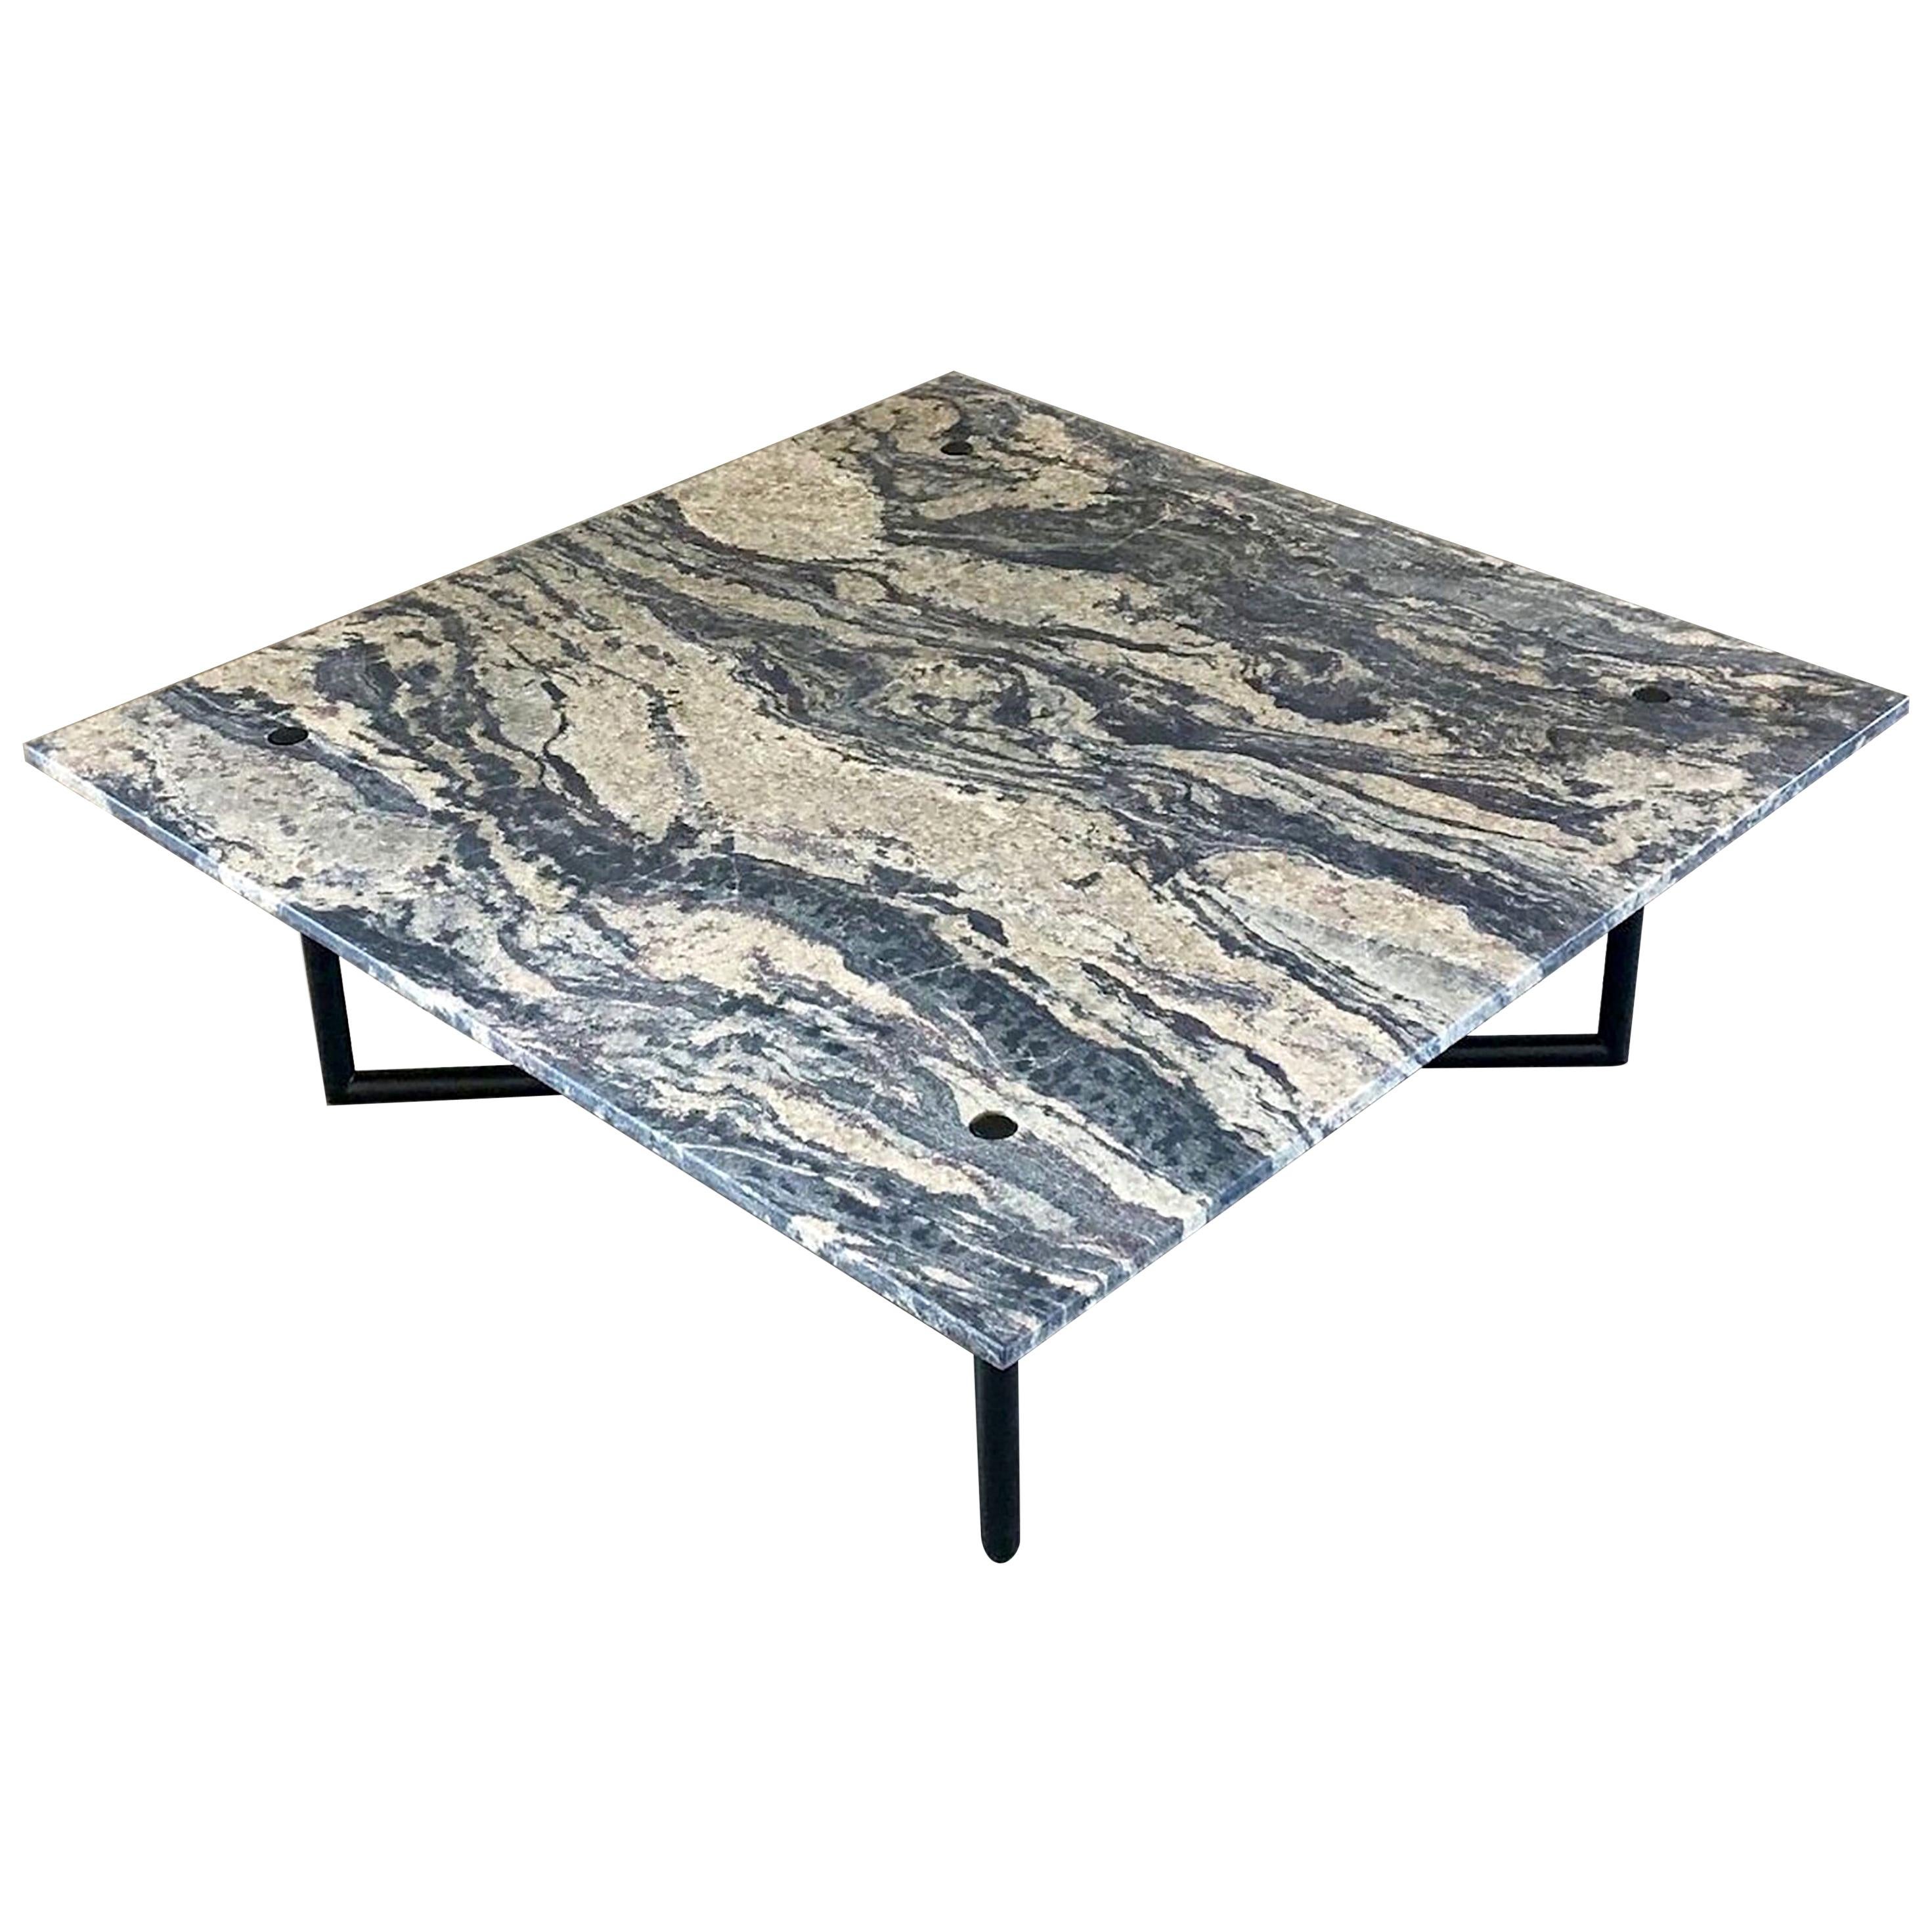 Outdoor Coffee Table Black Stainless Steel Base + Square Honed Stone Top